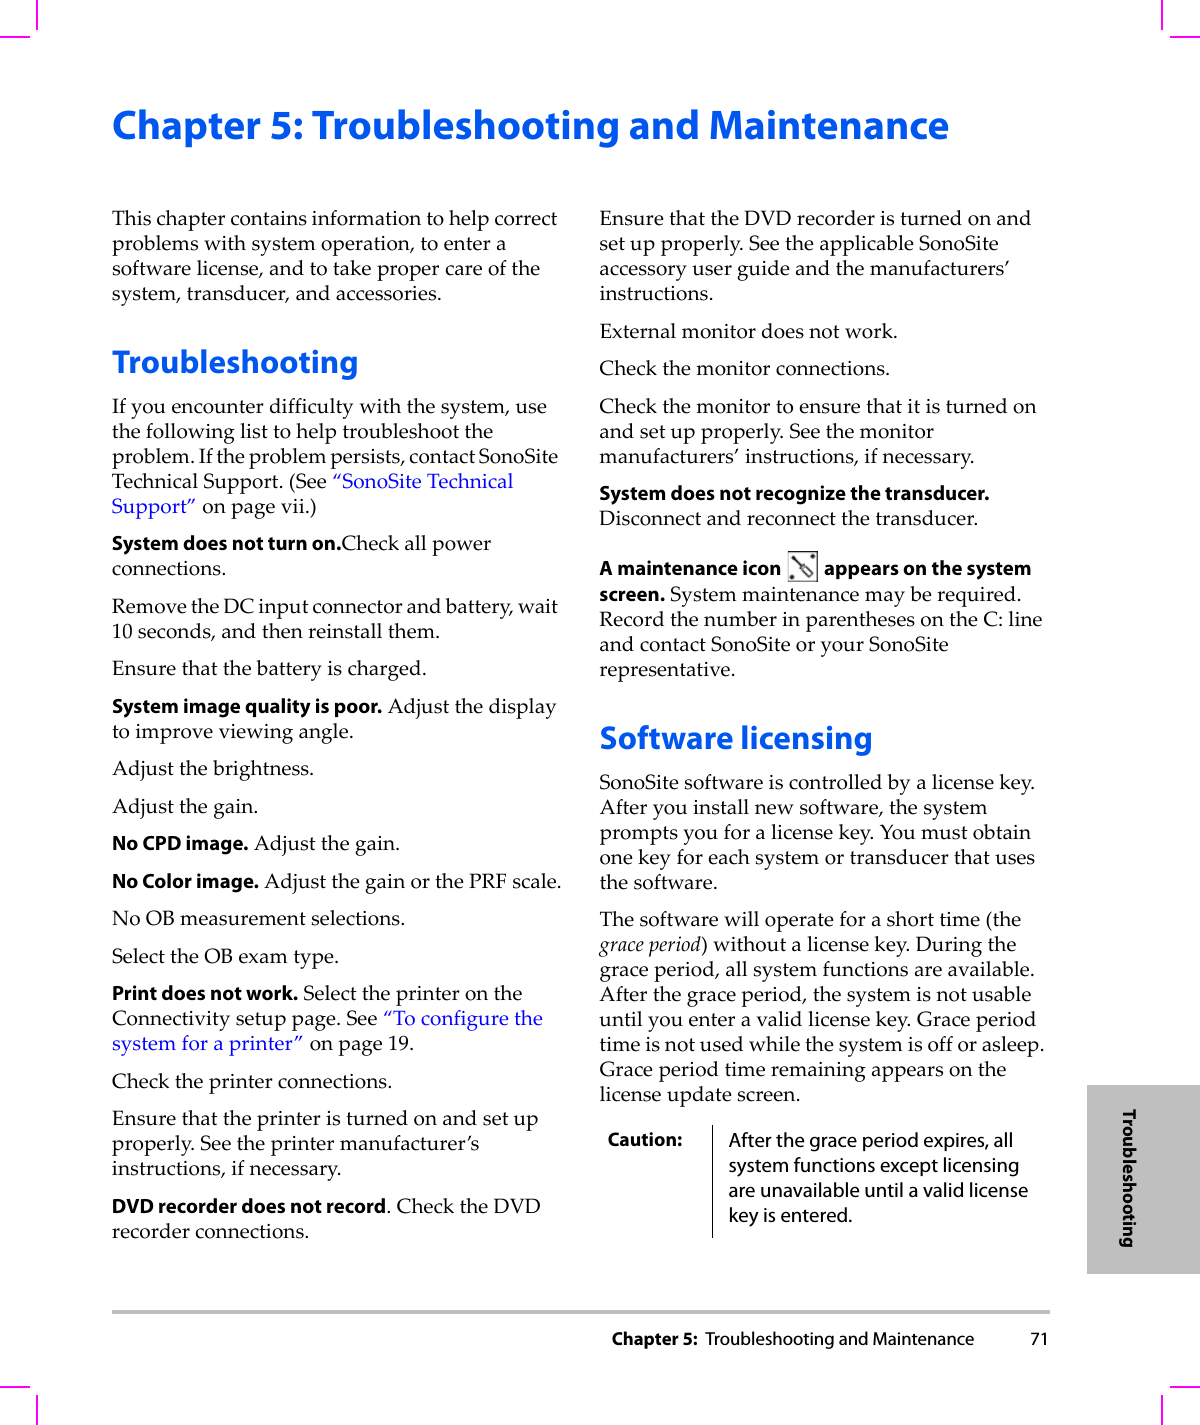 Chapter 5:  Troubleshooting and Maintenance 71TroubleshootingChapter 5: Troubleshooting and MaintenanceThischaptercontainsinformationtohelpcorrectproblemswithsystemoperation,toenterasoftwarelicense,andtotakepropercareofthesystem,transducer,andaccessories.TroubleshootingIfyouencounterdifficultywiththesystem,usethefollowinglisttohelptroubleshoottheproblem.Iftheproblempersists,contactSonoSiteTechnicalSupport.(See“SonoSiteTechnicalSupport”onpage vii.)System does not turn on.Checkallpowerconnections.RemovetheDCinputconnectorandbattery,wait10seconds,andthenreinstallthem.Ensurethatthebatteryischarged.System image quality is poor.Adjustthedisplaytoimproveviewingangle.Adjustthebrightness.Adjustthegain.No CPD image.Adjustthegain.No Color image.AdjustthegainorthePRFscale.NoOBmeasurementselections.SelecttheOBexamtype.Print does not work.SelecttheprinterontheConnectivitysetuppage.See“Toconfigurethesystemforaprinter”onpage 19.Checktheprinterconnections.Ensurethattheprinteristurnedonandsetupproperly.Seetheprintermanufacturer’sinstructions,ifnecessary.DVD recorder does not record.ChecktheDVDrecorderconnections.EnsurethattheDVDrecorderisturnedonandsetupproperly.SeetheapplicableSonoSiteaccessoryuserguideandthemanufacturers’instructions.Externalmonitordoesnotwork.Checkthemonitorconnections.Checkthemonitortoensurethatitisturnedonandsetupproperly.Seethemonitormanufacturers’instructions,ifnecessary.System does not recognize the transducer.Disconnectandreconnectthetransducer.A maintenance icon   appears on the system screen.Systemmaintenancemayberequired.RecordthenumberinparenthesesontheC:lineandcontactSonoSiteoryourSonoSiterepresentative.Software licensingSonoSitesoftwareiscontrolledbyalicensekey.Afteryouinstallnewsoftware,thesystempromptsyouforalicensekey.Youmustobtainonekeyforeachsystemortransducerthatusesthesoftware.Thesoftwarewilloperateforashorttime(thegraceperiod)withoutalicensekey.Duringthegraceperiod,allsystemfunctionsareavailable.Afterthegraceperiod,thesystemisnotusableuntilyouenteravalidlicensekey.Graceperiodtimeisnotusedwhilethesystemisofforasleep.Graceperiodtimeremainingappearsonthelicenseupdatescreen.Caution: After the grace period expires, all system functions except licensing are unavailable until a valid license key is entered.